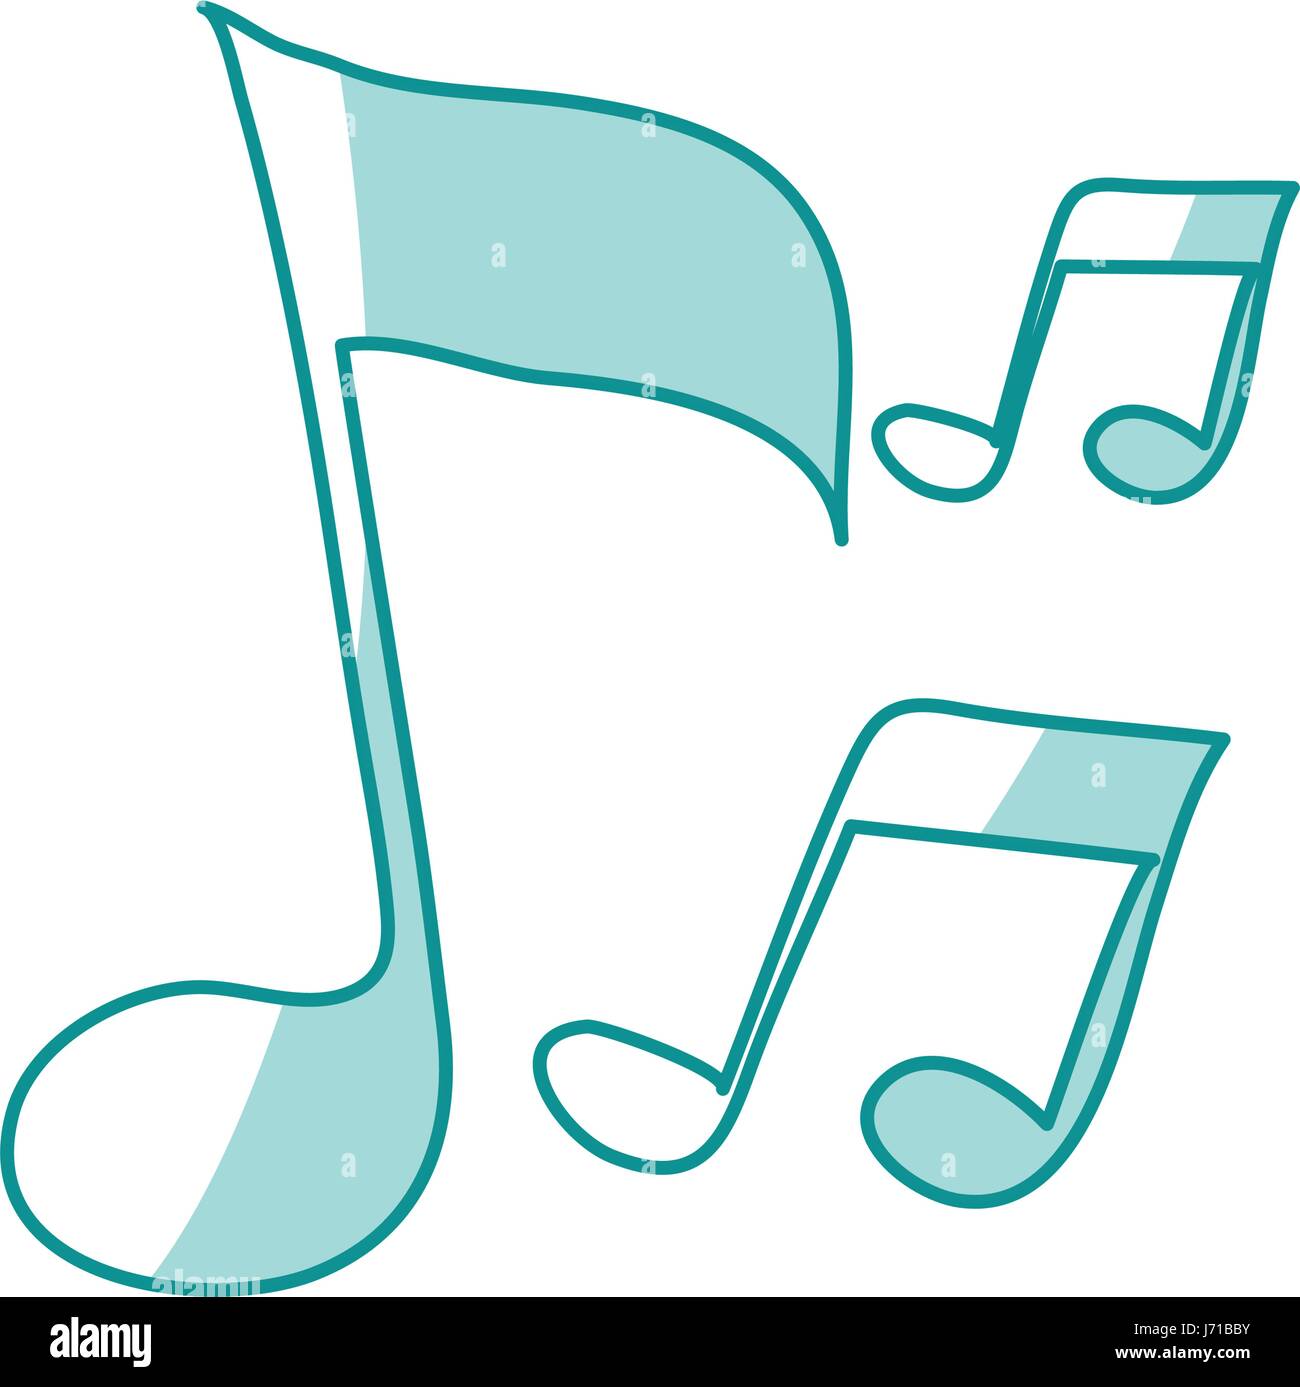 blue shading silhouette of musical notes Stock Vector